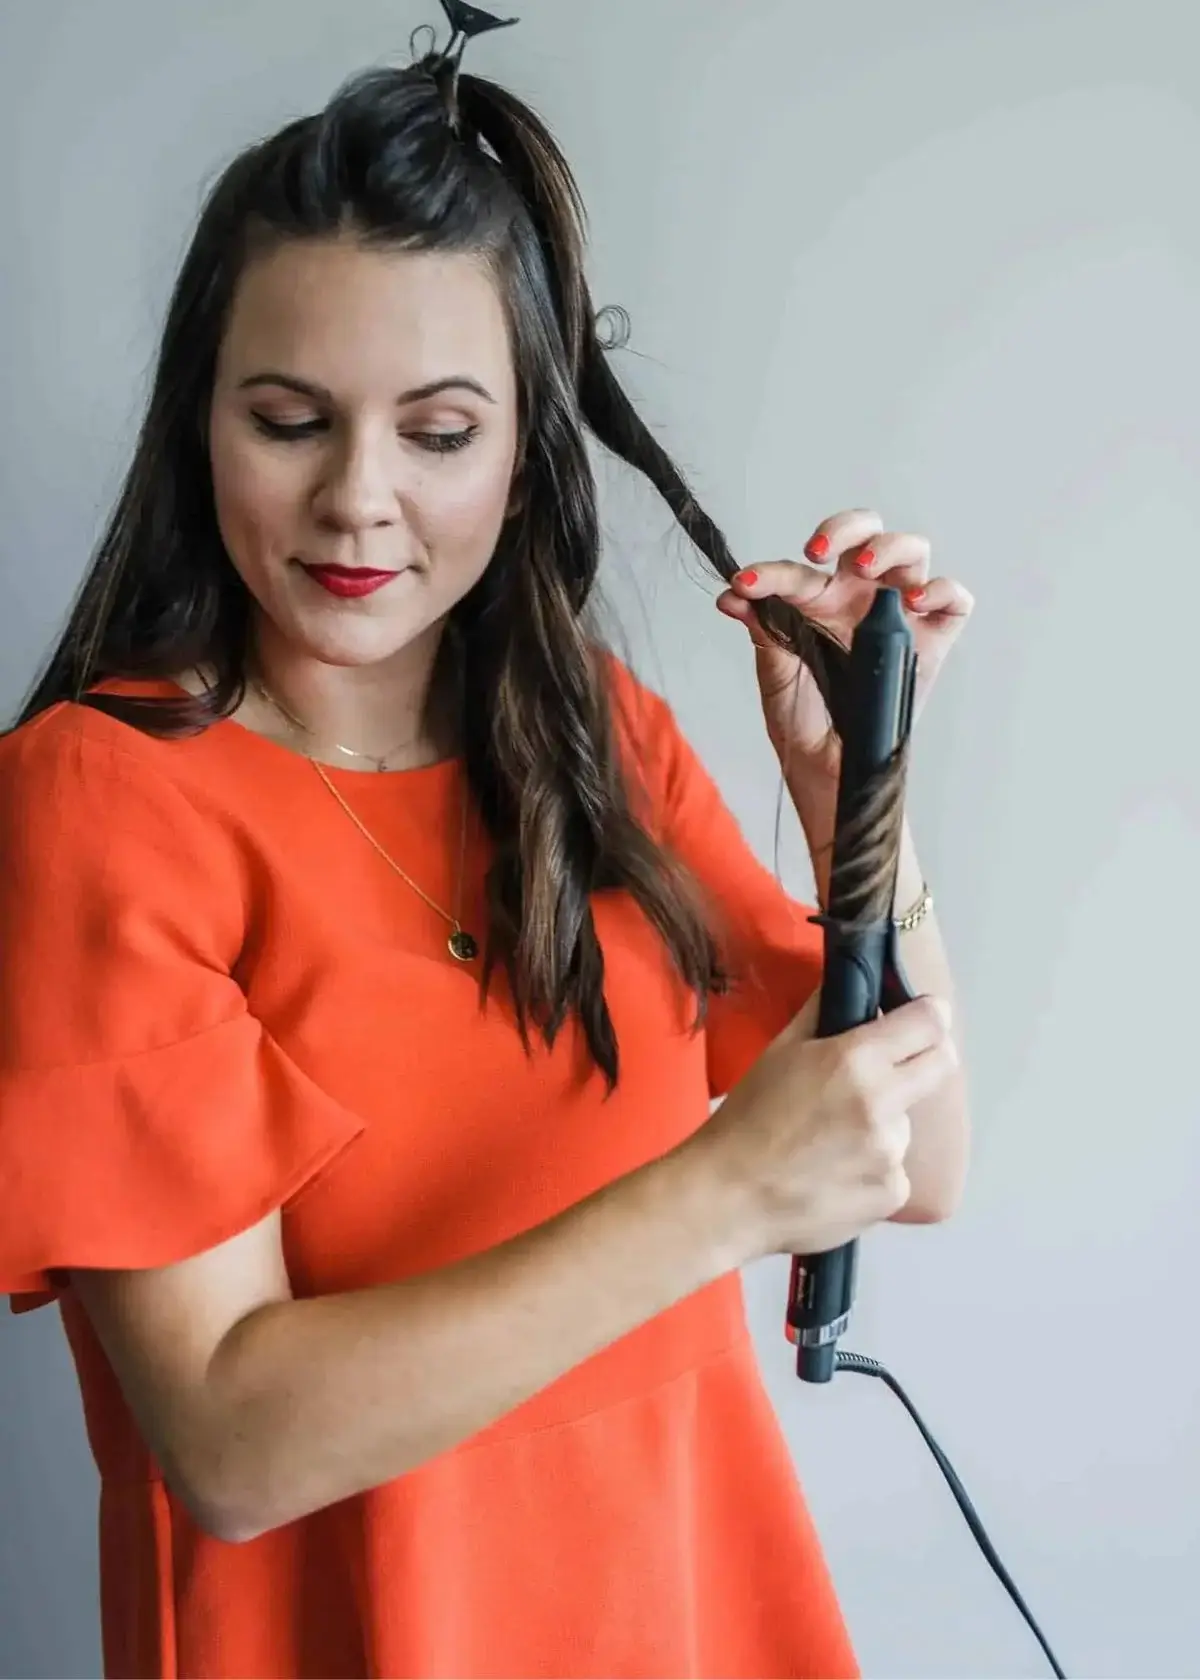 What hair types best suit beach wave curling irons?